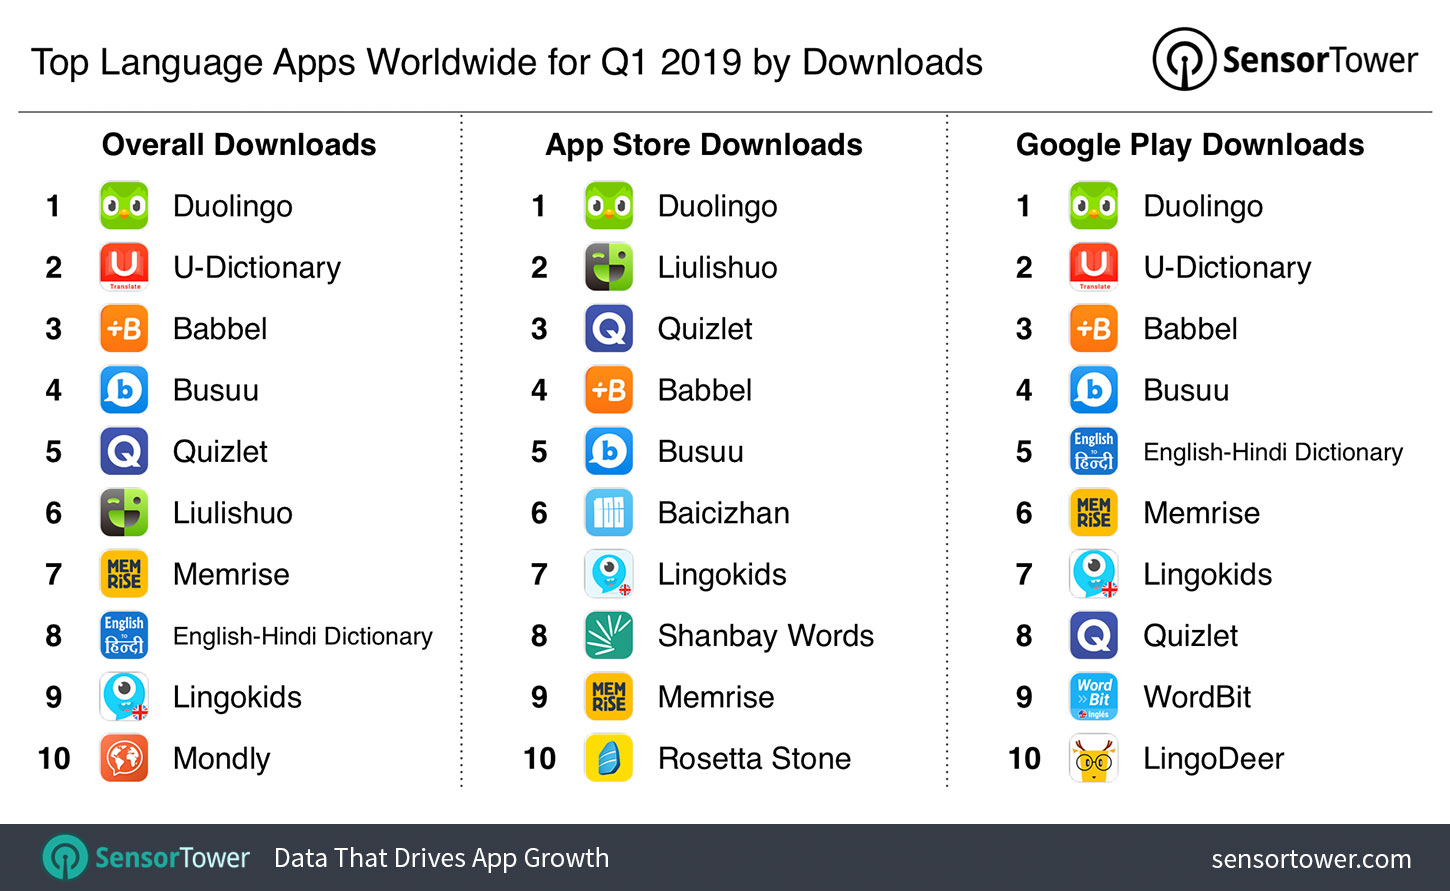 Top Language Apps Worldwide for Q1 2019 by Downloads